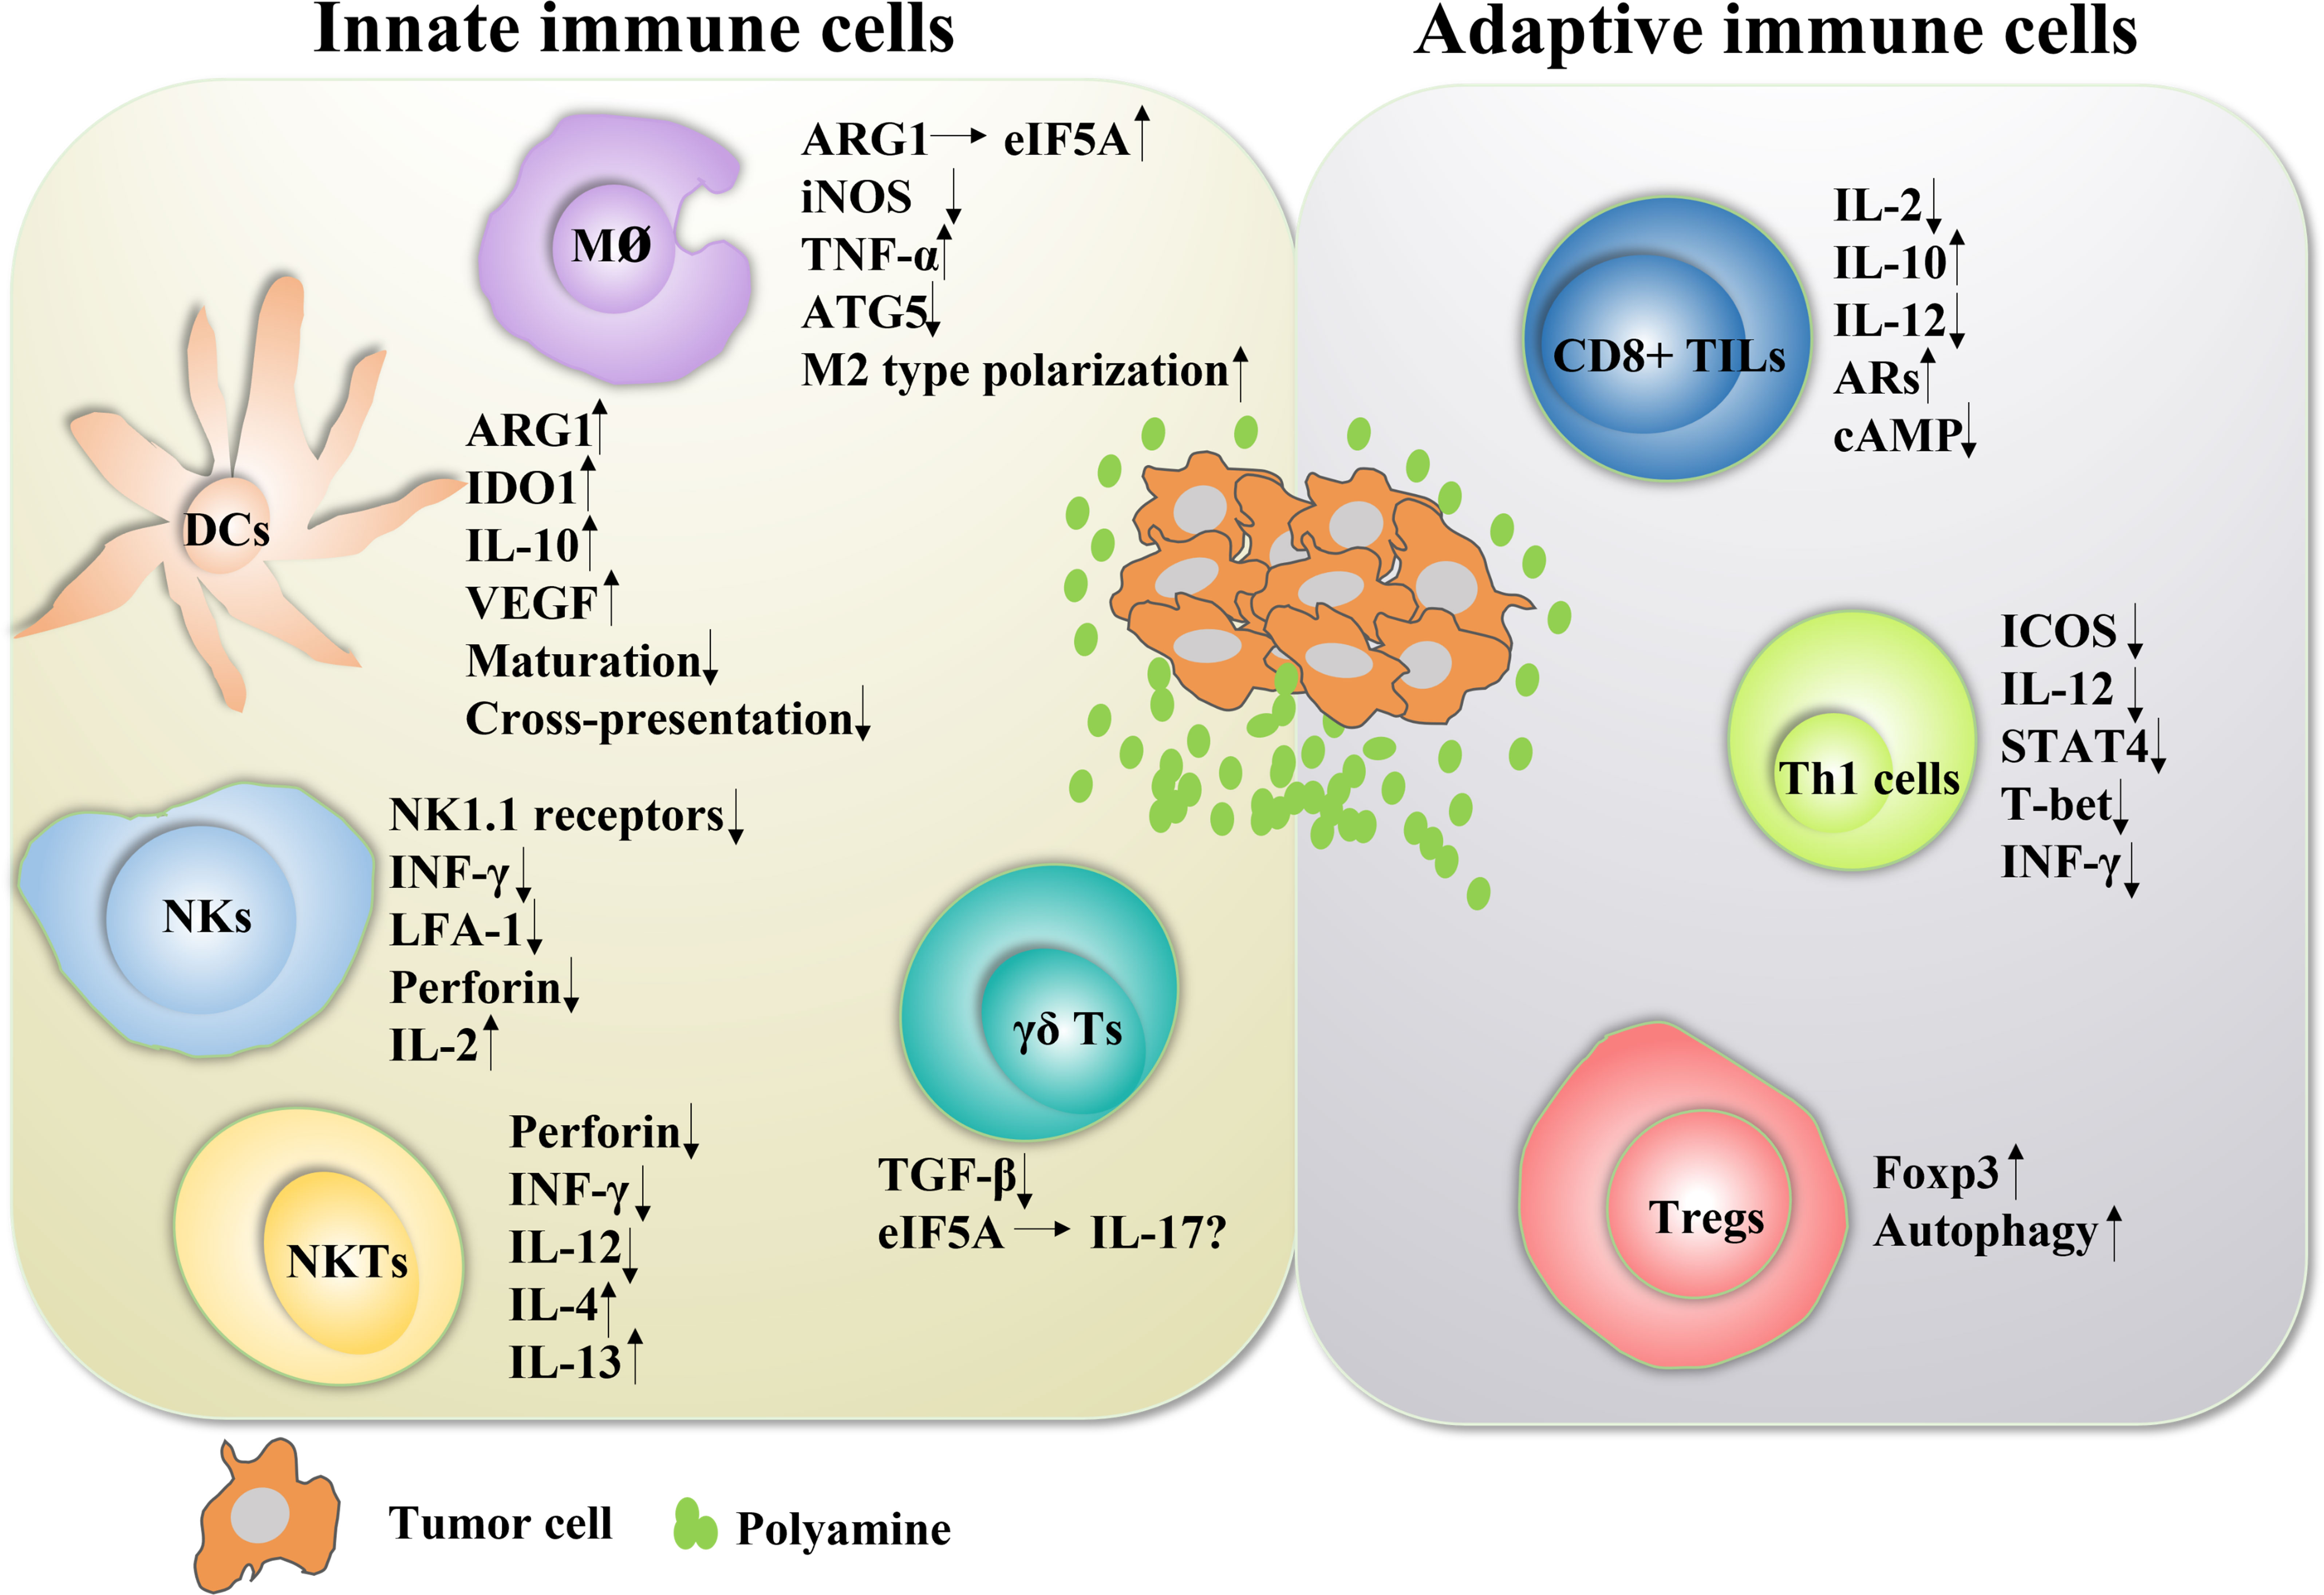 Polyamines from myeloid-derived suppressor cells promote Th17 polarization  and disease progression: Molecular Therapy